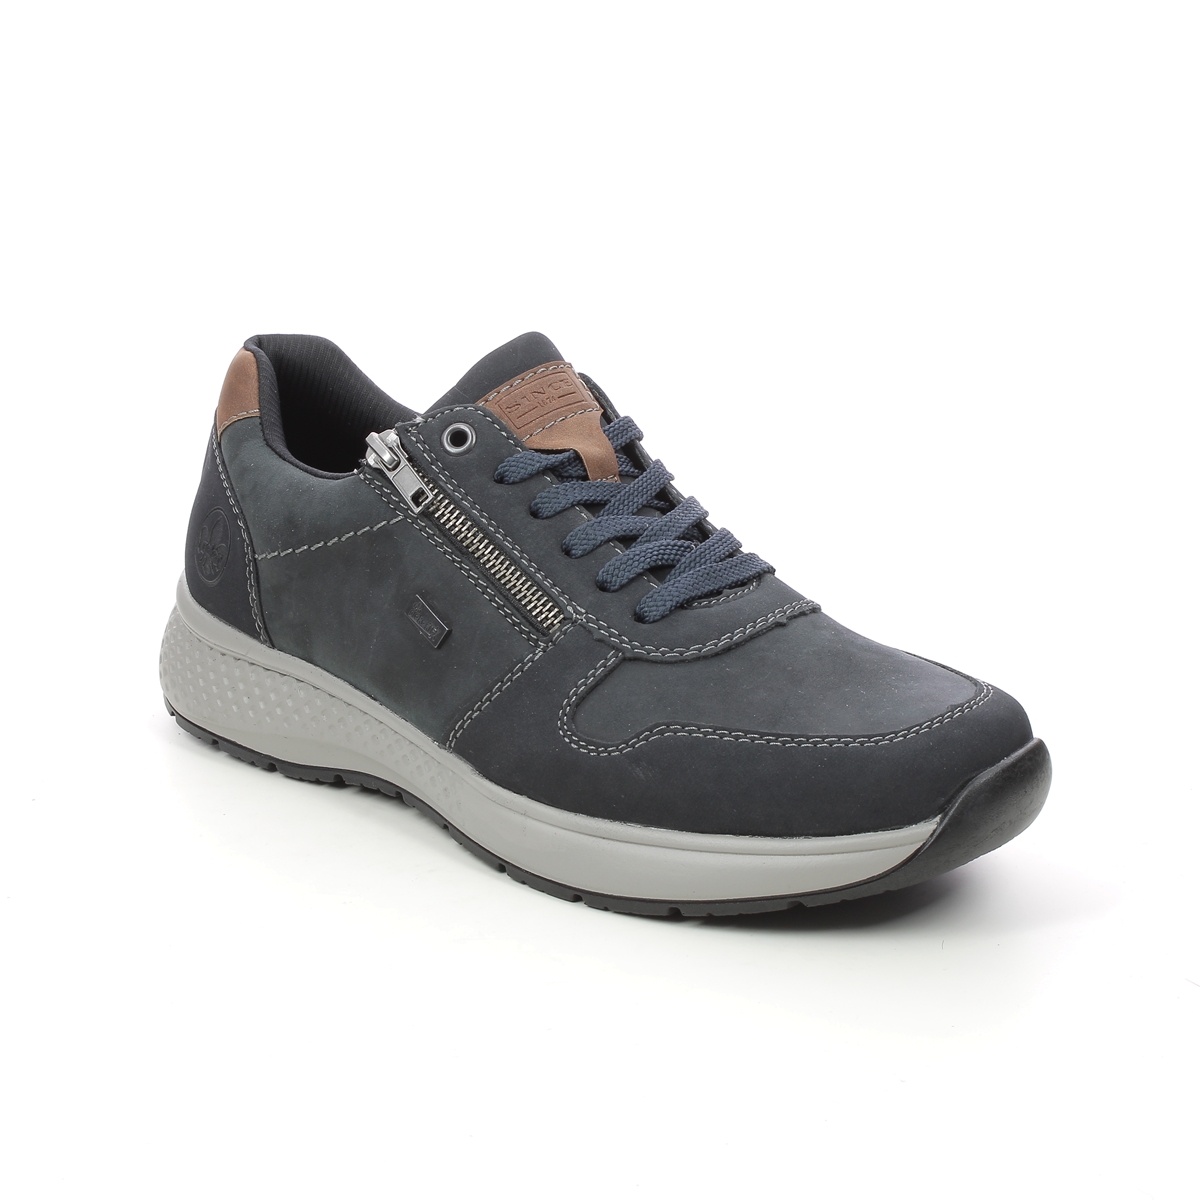 Rieker Delson Zip Tex Navy Leather Mens Comfort Shoes B7613-14 In Size 45 In Plain Navy Leather